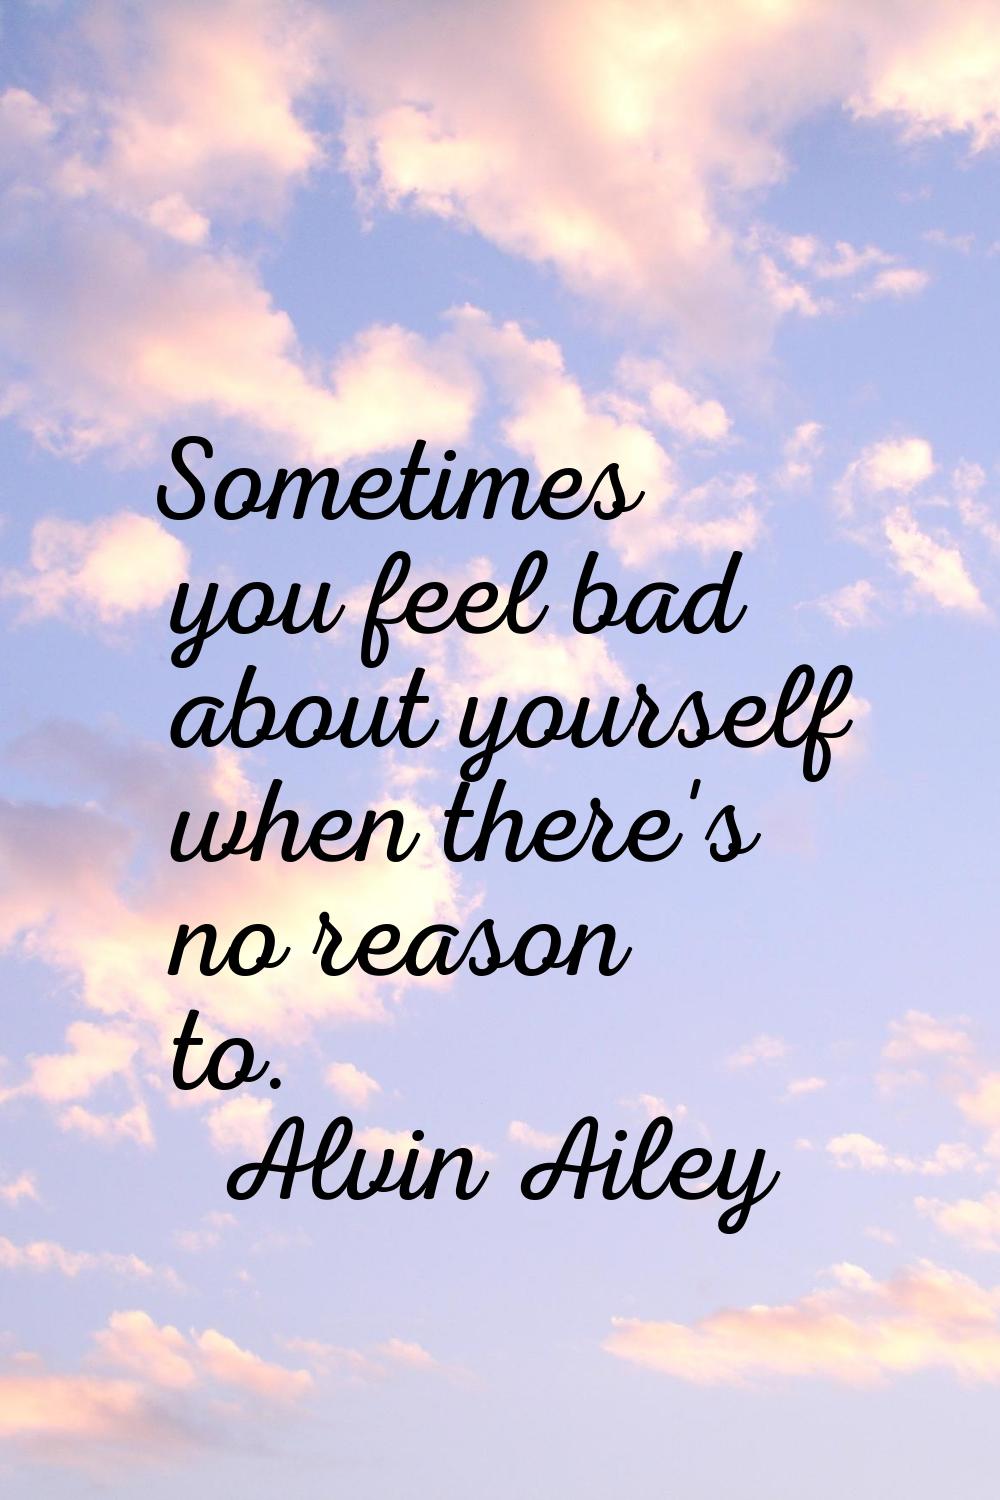 Sometimes you feel bad about yourself when there's no reason to.